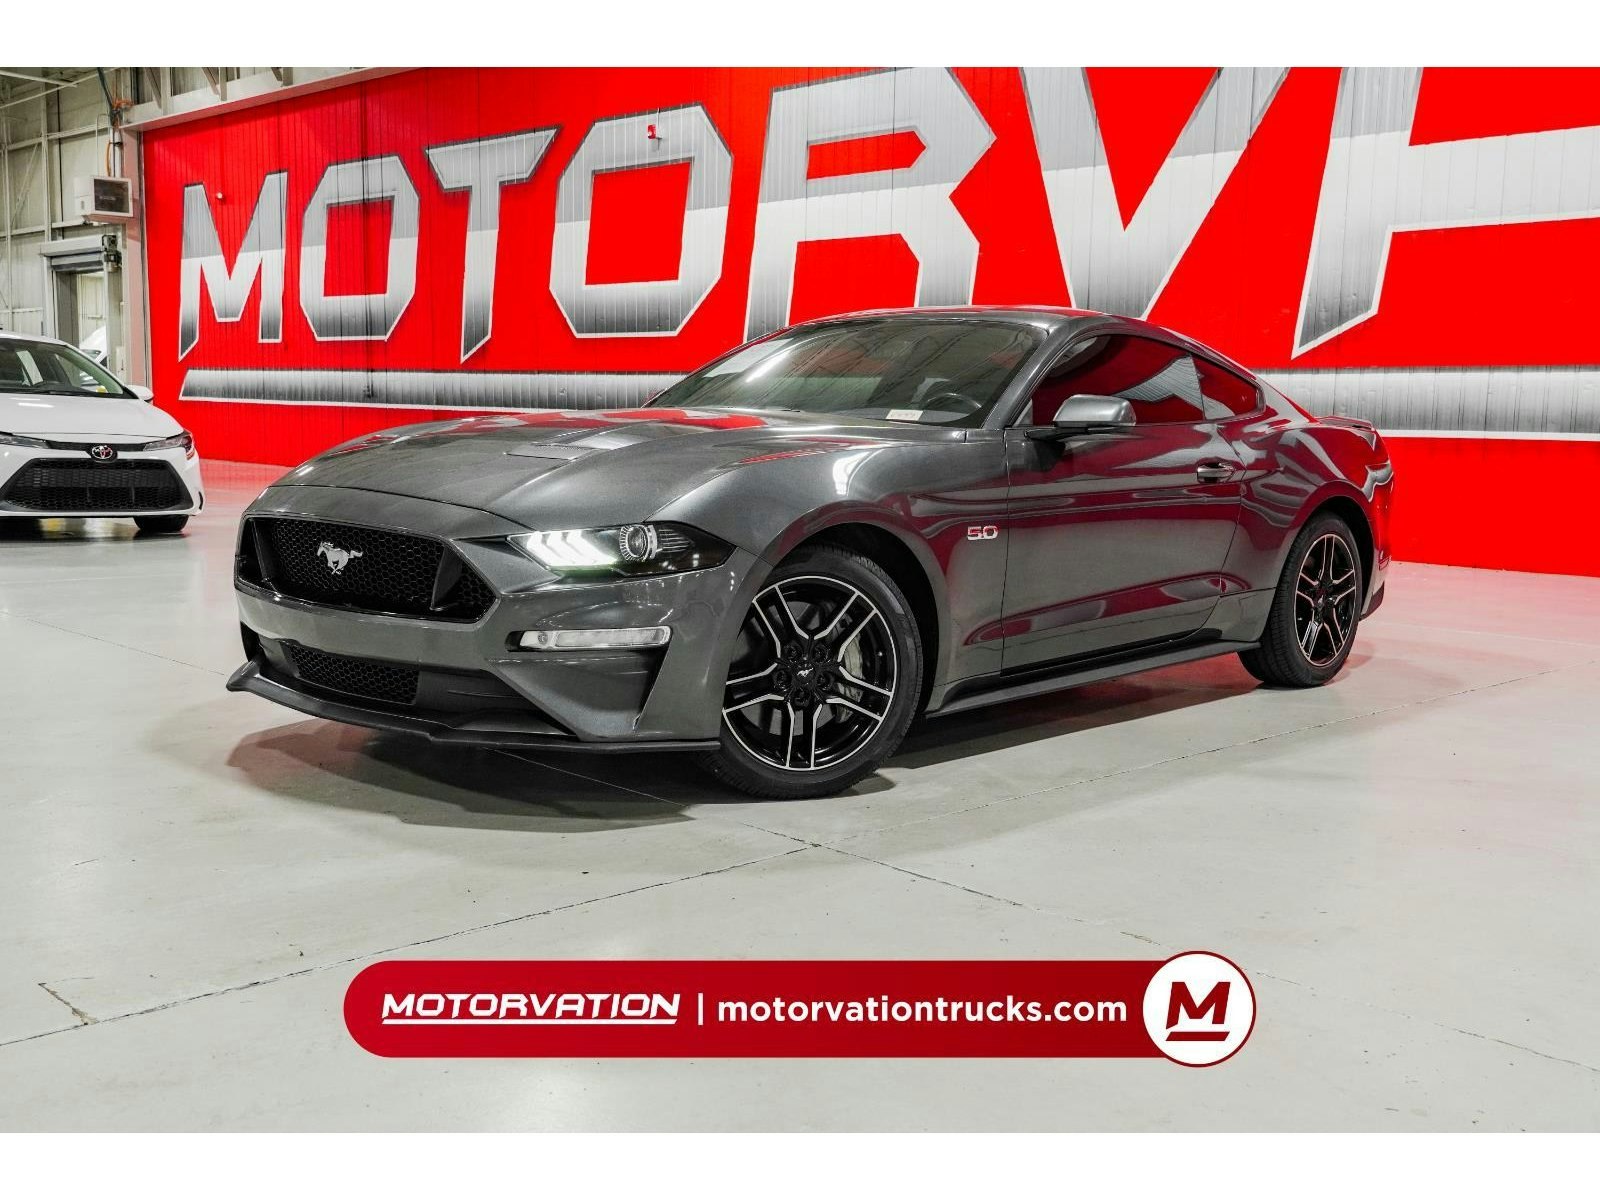 2019 Ford Mustang GT (6497) Main Image